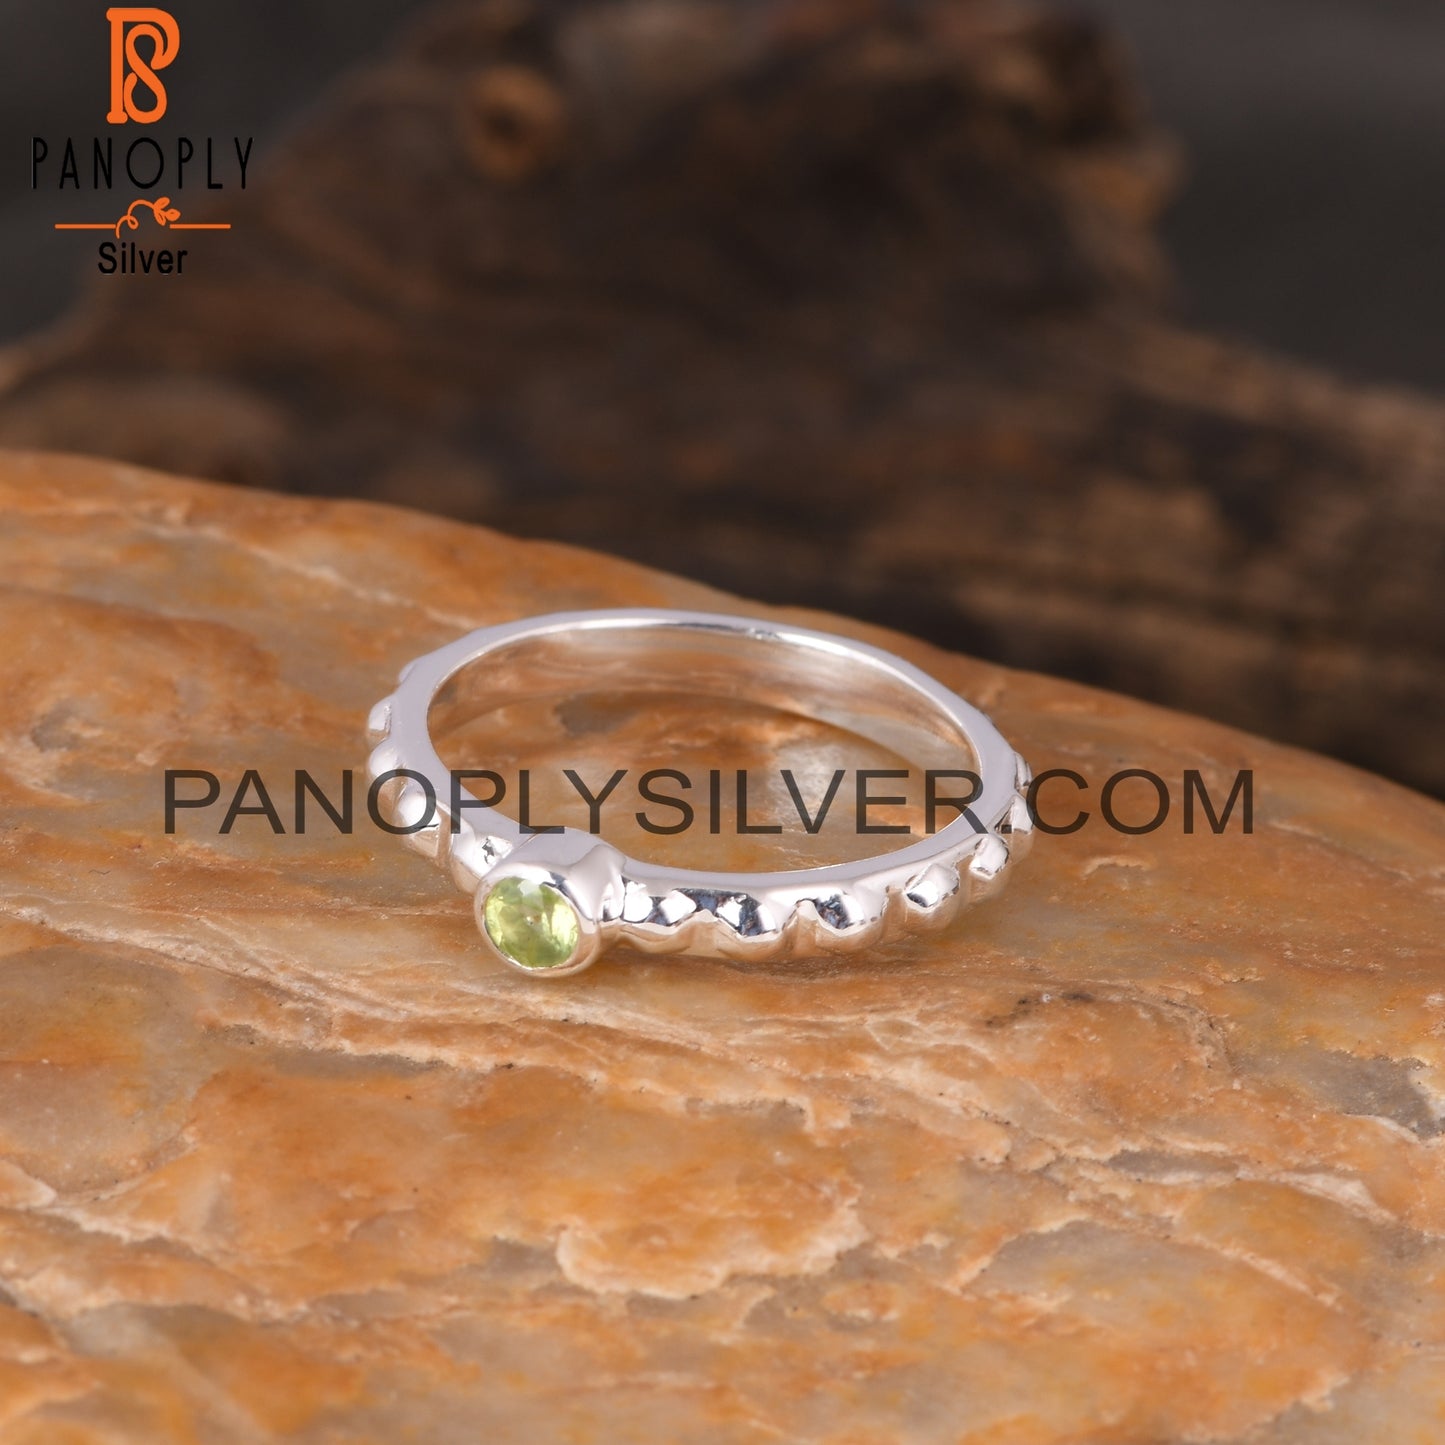 Bead Band Peridot Round 925 Sterling Silver Ring